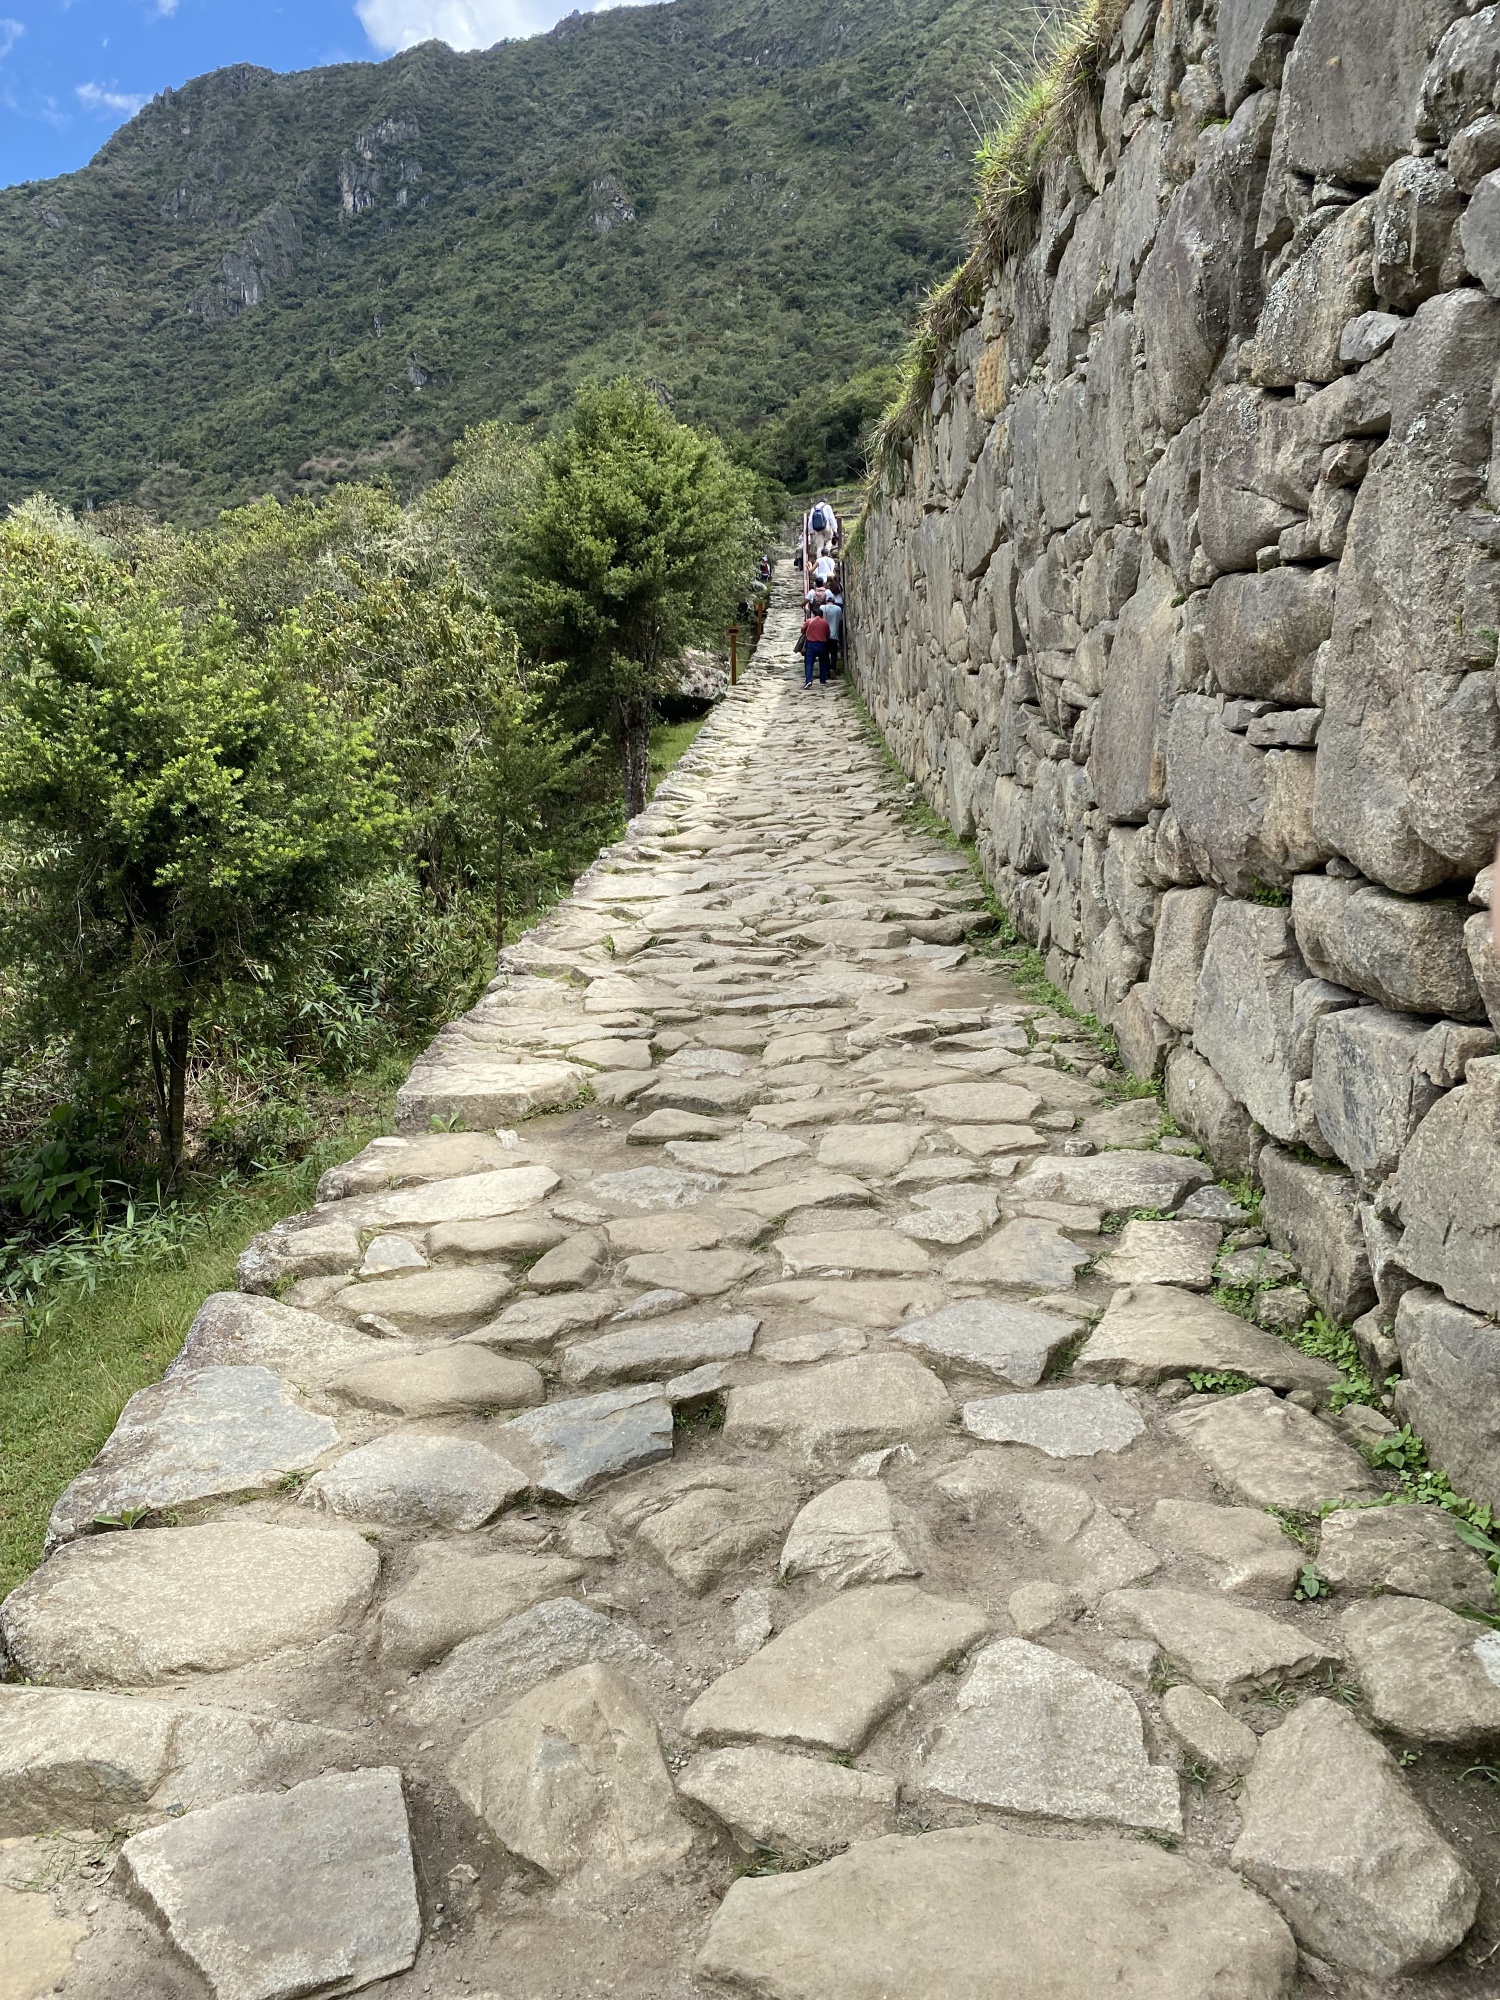 Our tour guide kept asking if I wanted to have a break, so I obliged. It was difficult because the paths were narrow, and this was where it ended up in - finally I can breathe better!